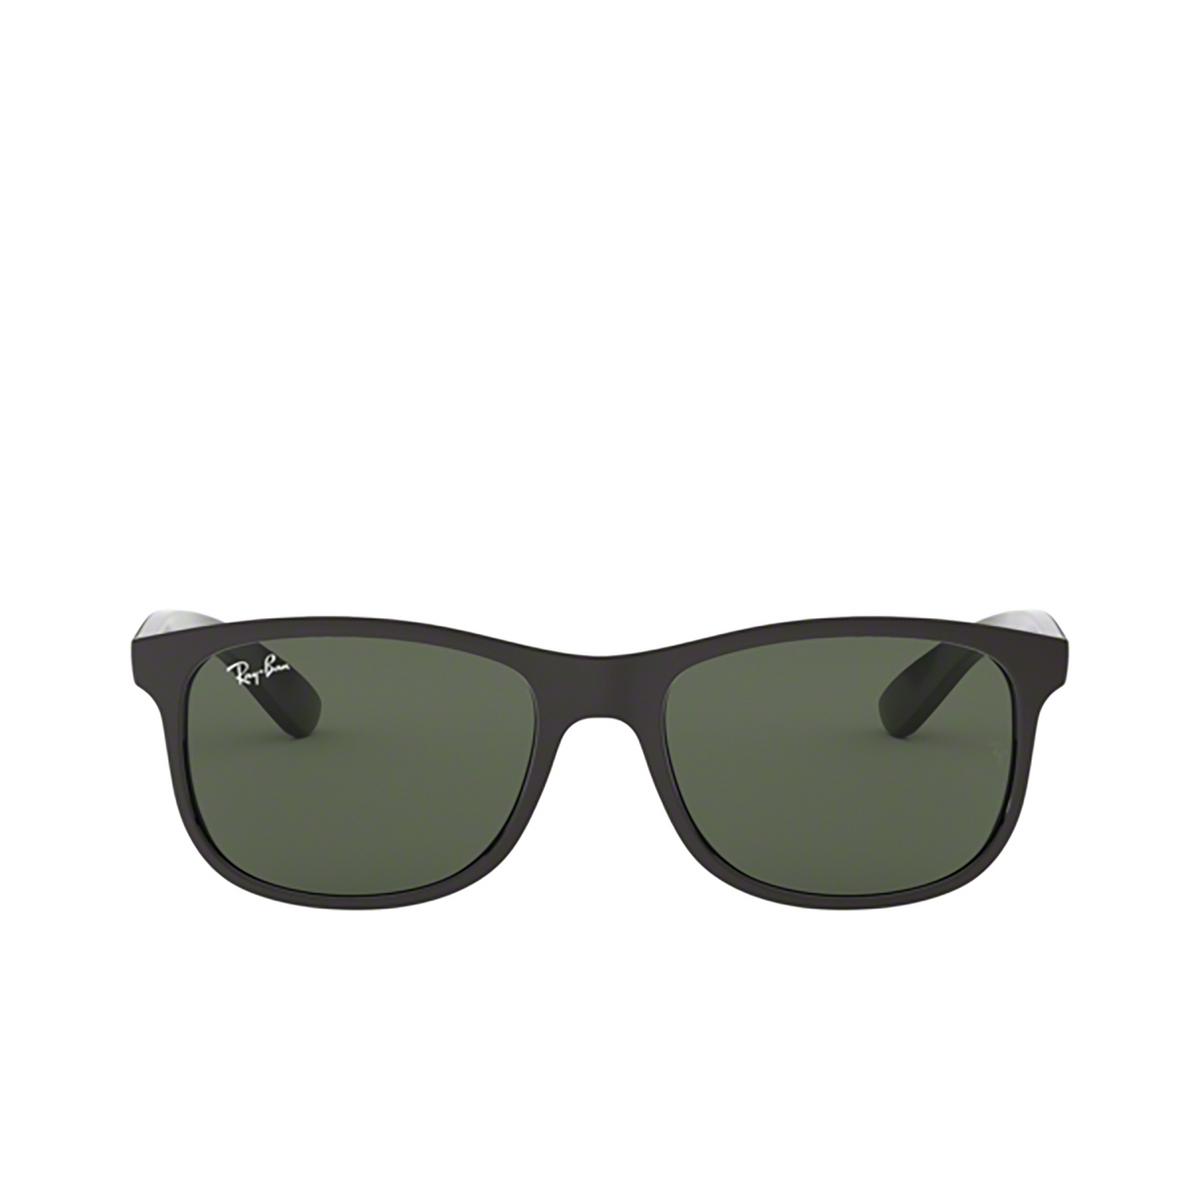 Ray-Ban® Square Sunglasses: RB4202 Andy color 606971 Matte Black - 1/3